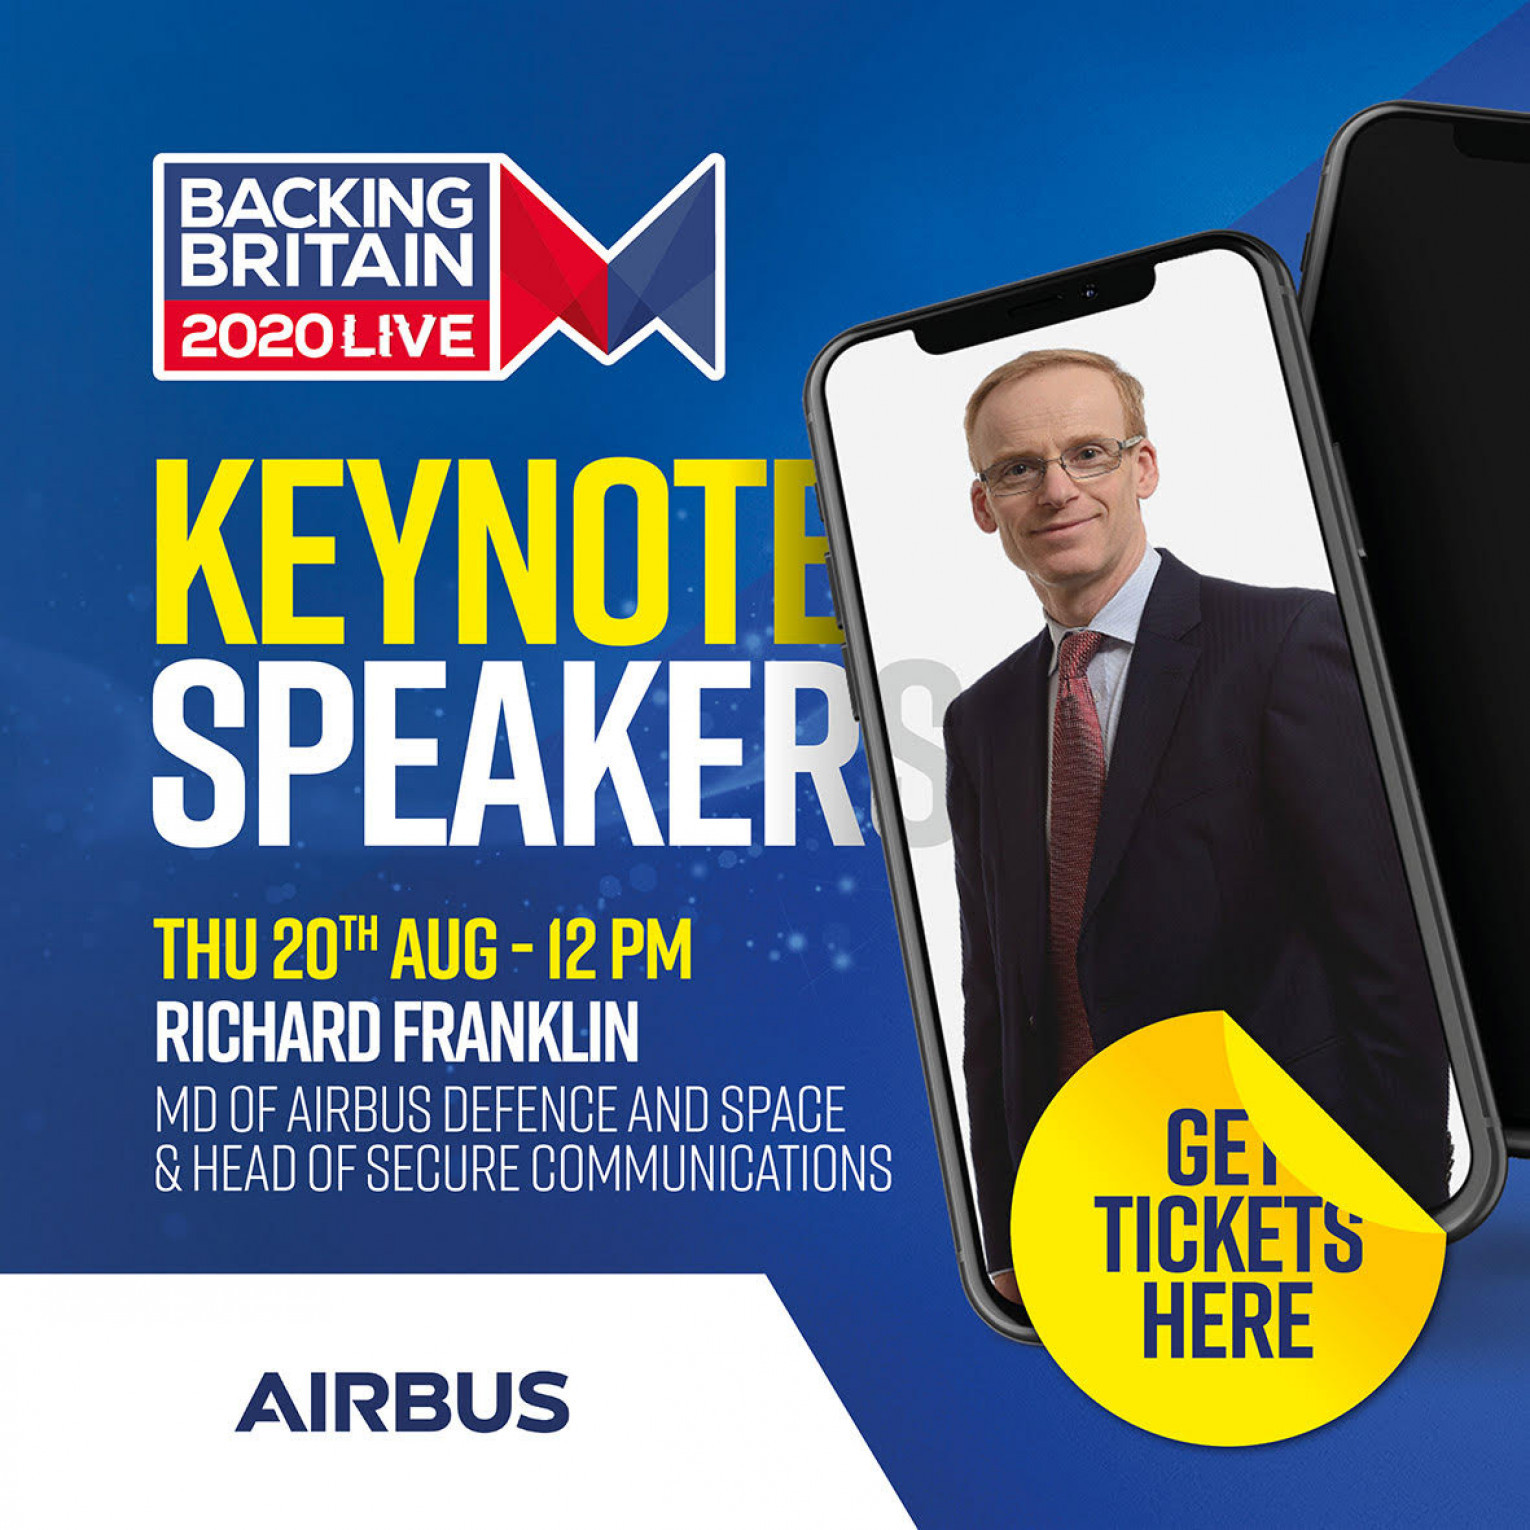 Keynote speaker - Richard Franklin UK MD of Airbus Defence and Space & Head of Secure Communications